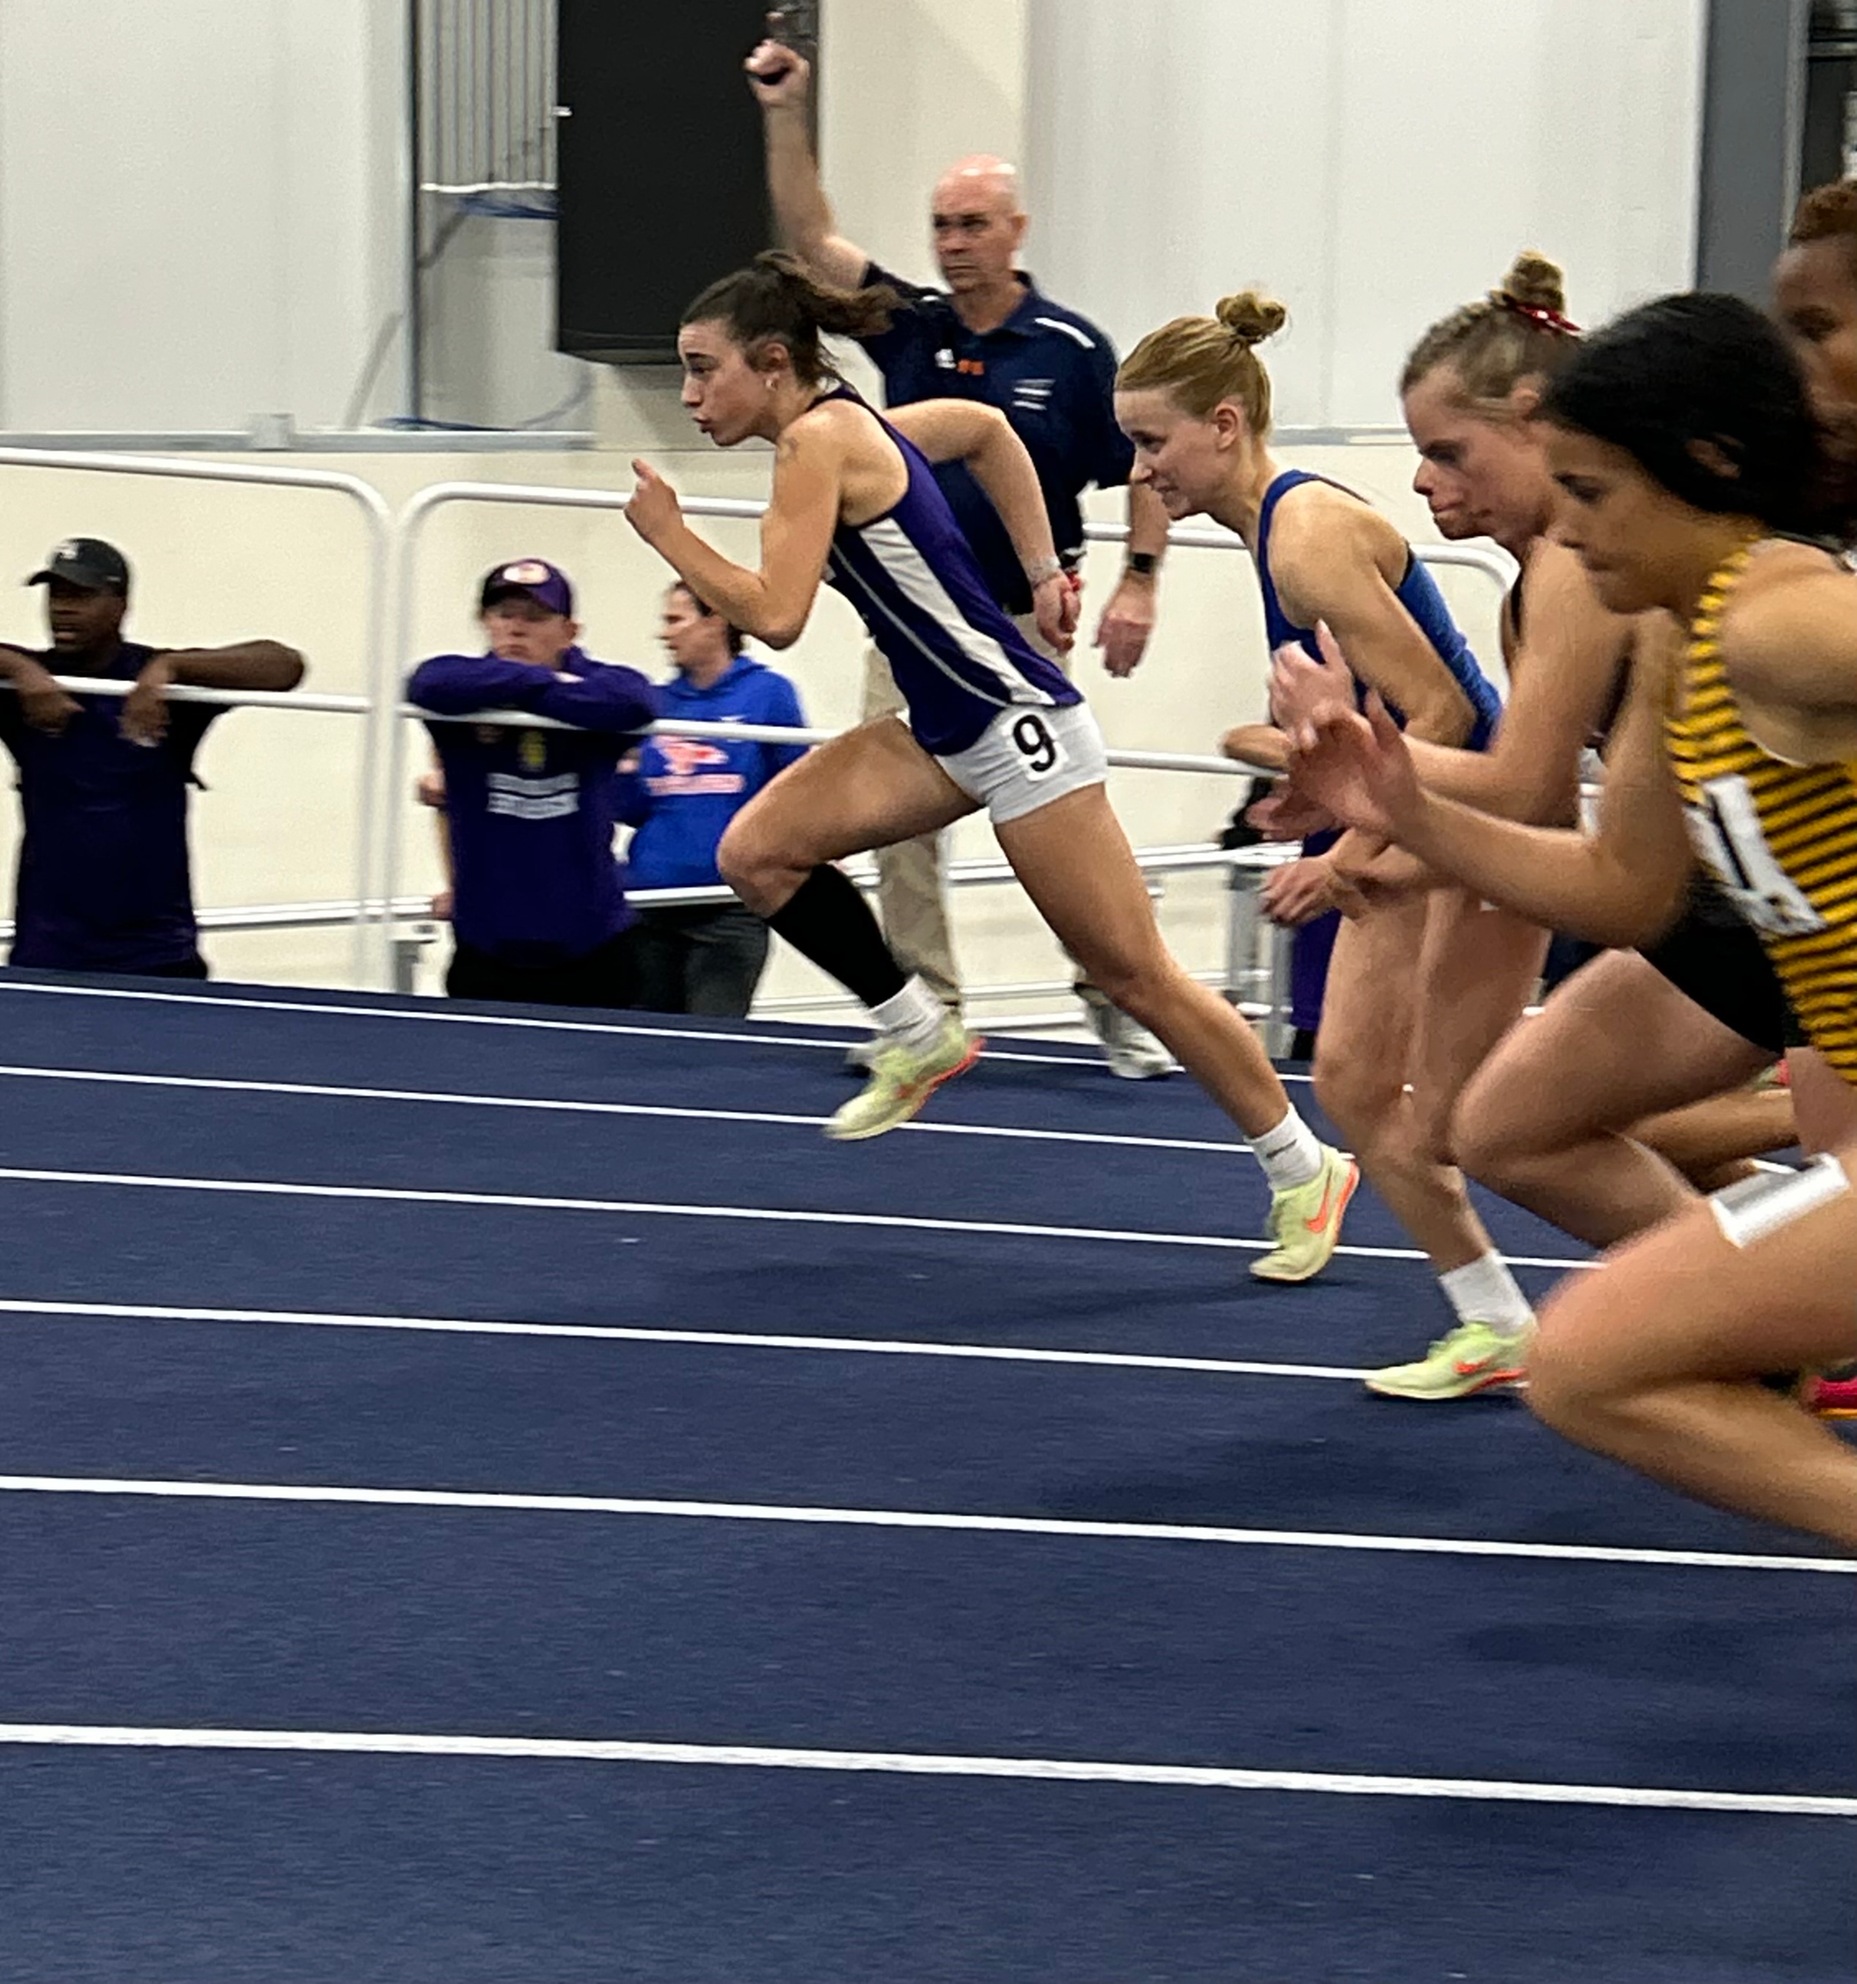 The Ranger College Men’s and Women’s Indoor Track season concluded this past weekend